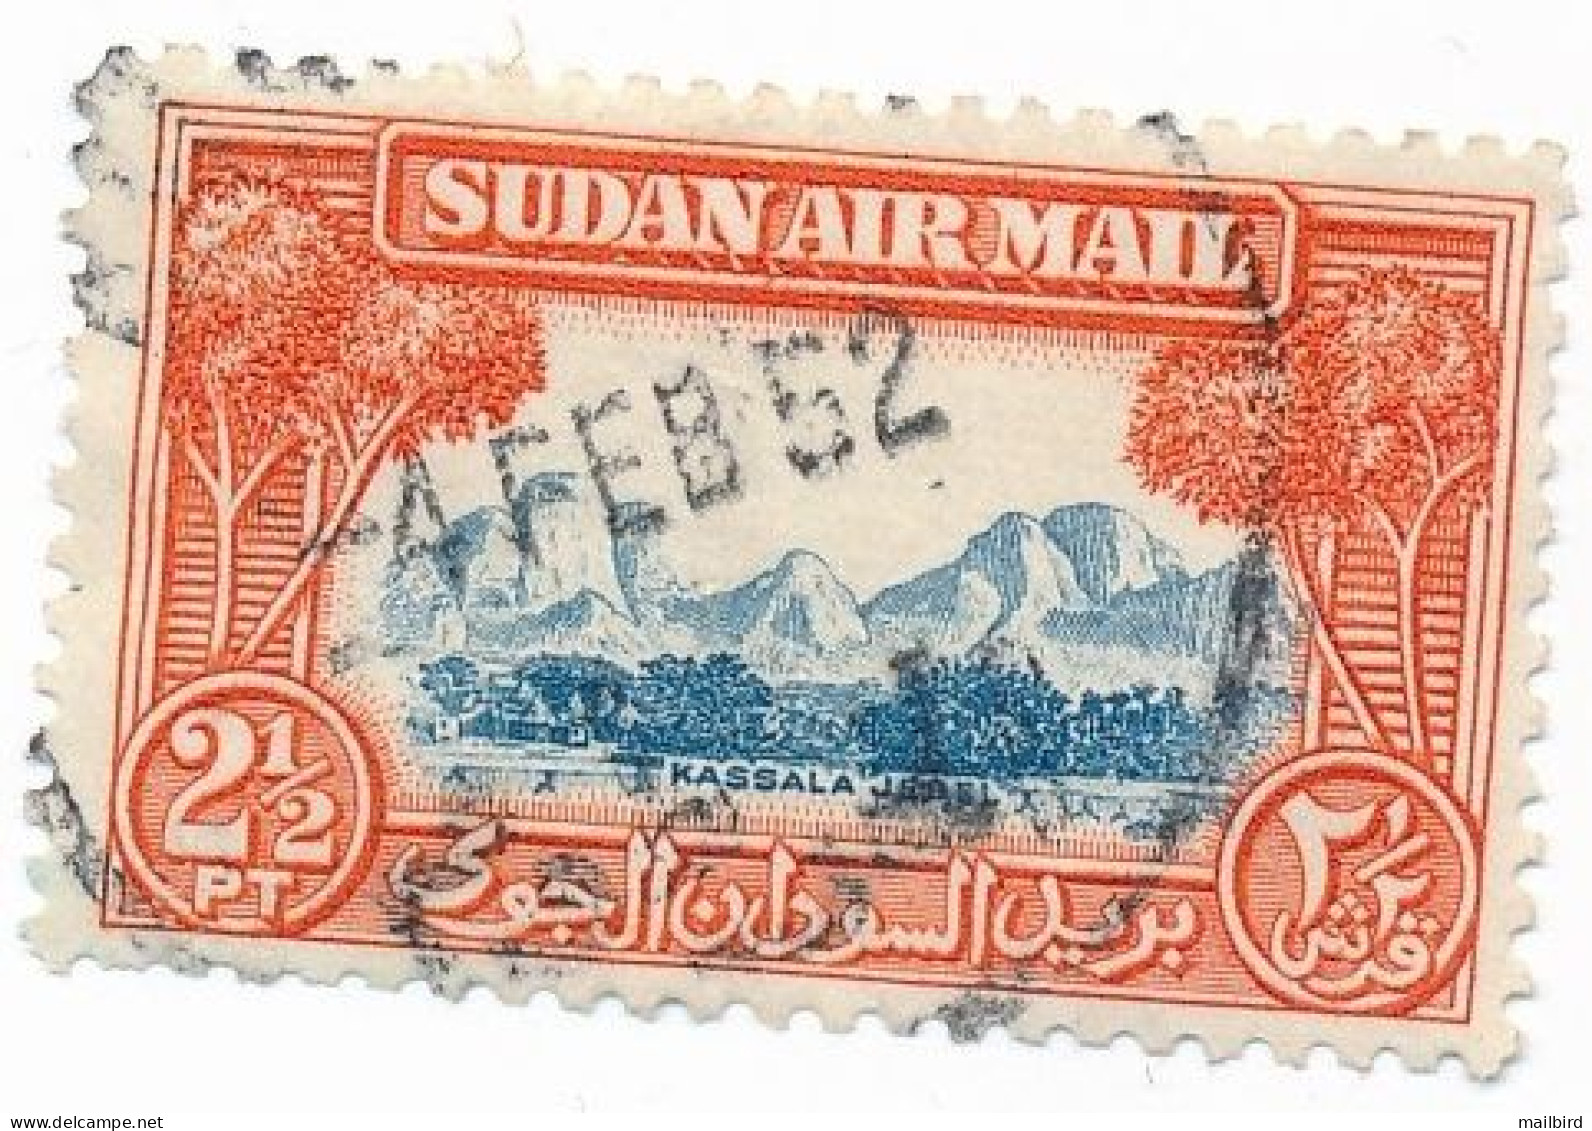 Sudan 1950 Airmail - Local Motives 2½ Pia. Rare & Collectible Stamp - USED & Stamped 4 FEB 1952 - Soedan (1954-...)